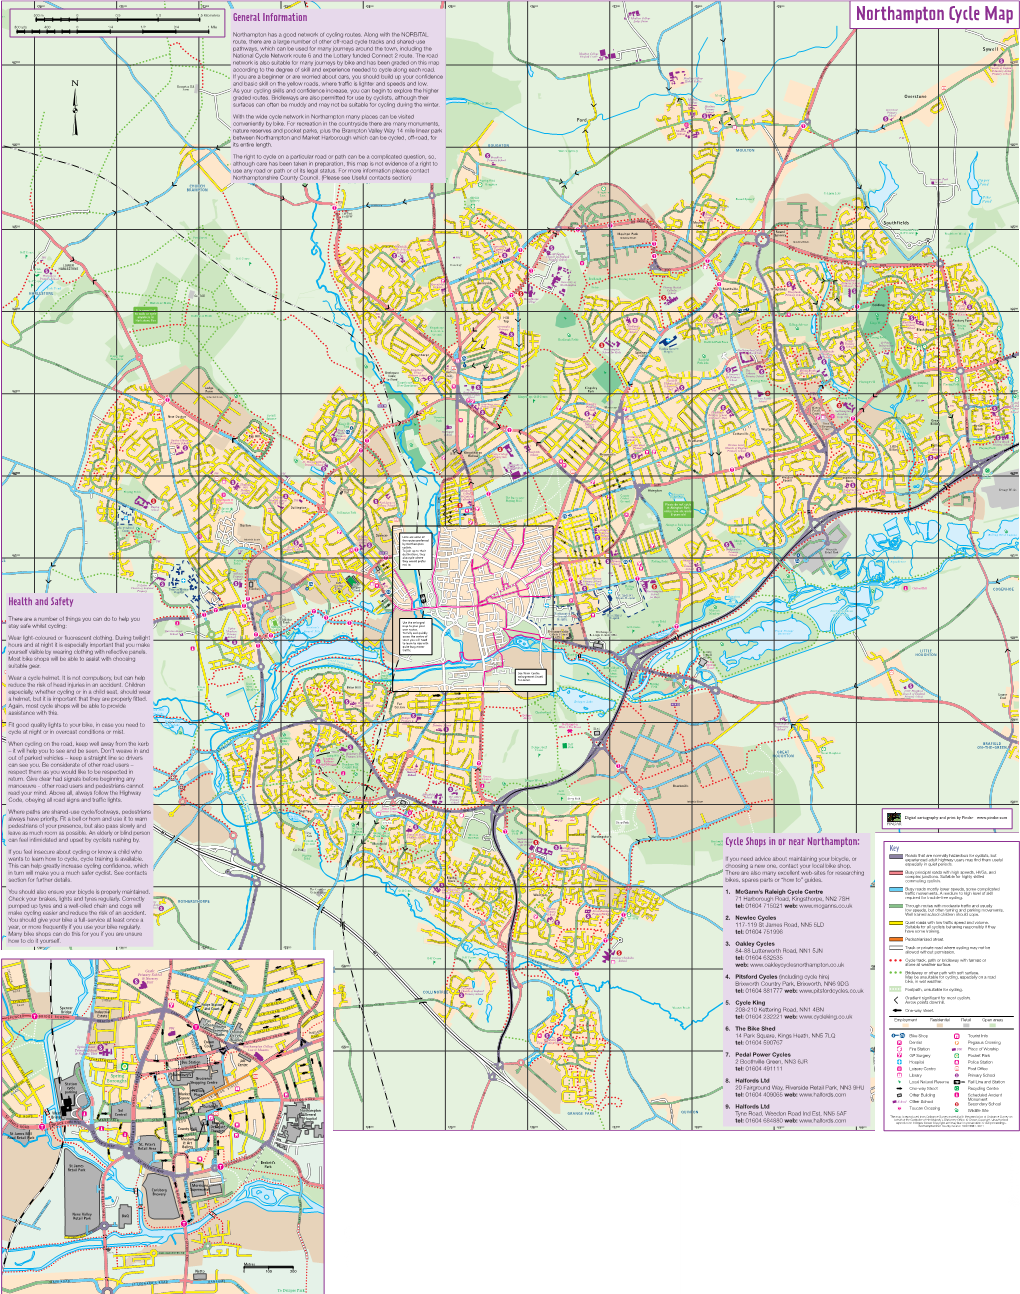 Northampton Cycle Map N E L a M 800 Yds 400 0 1/4 1/2 3/4 1 Mile T O R Y E R Northamptonm Has a Good Network of Cycling Routes